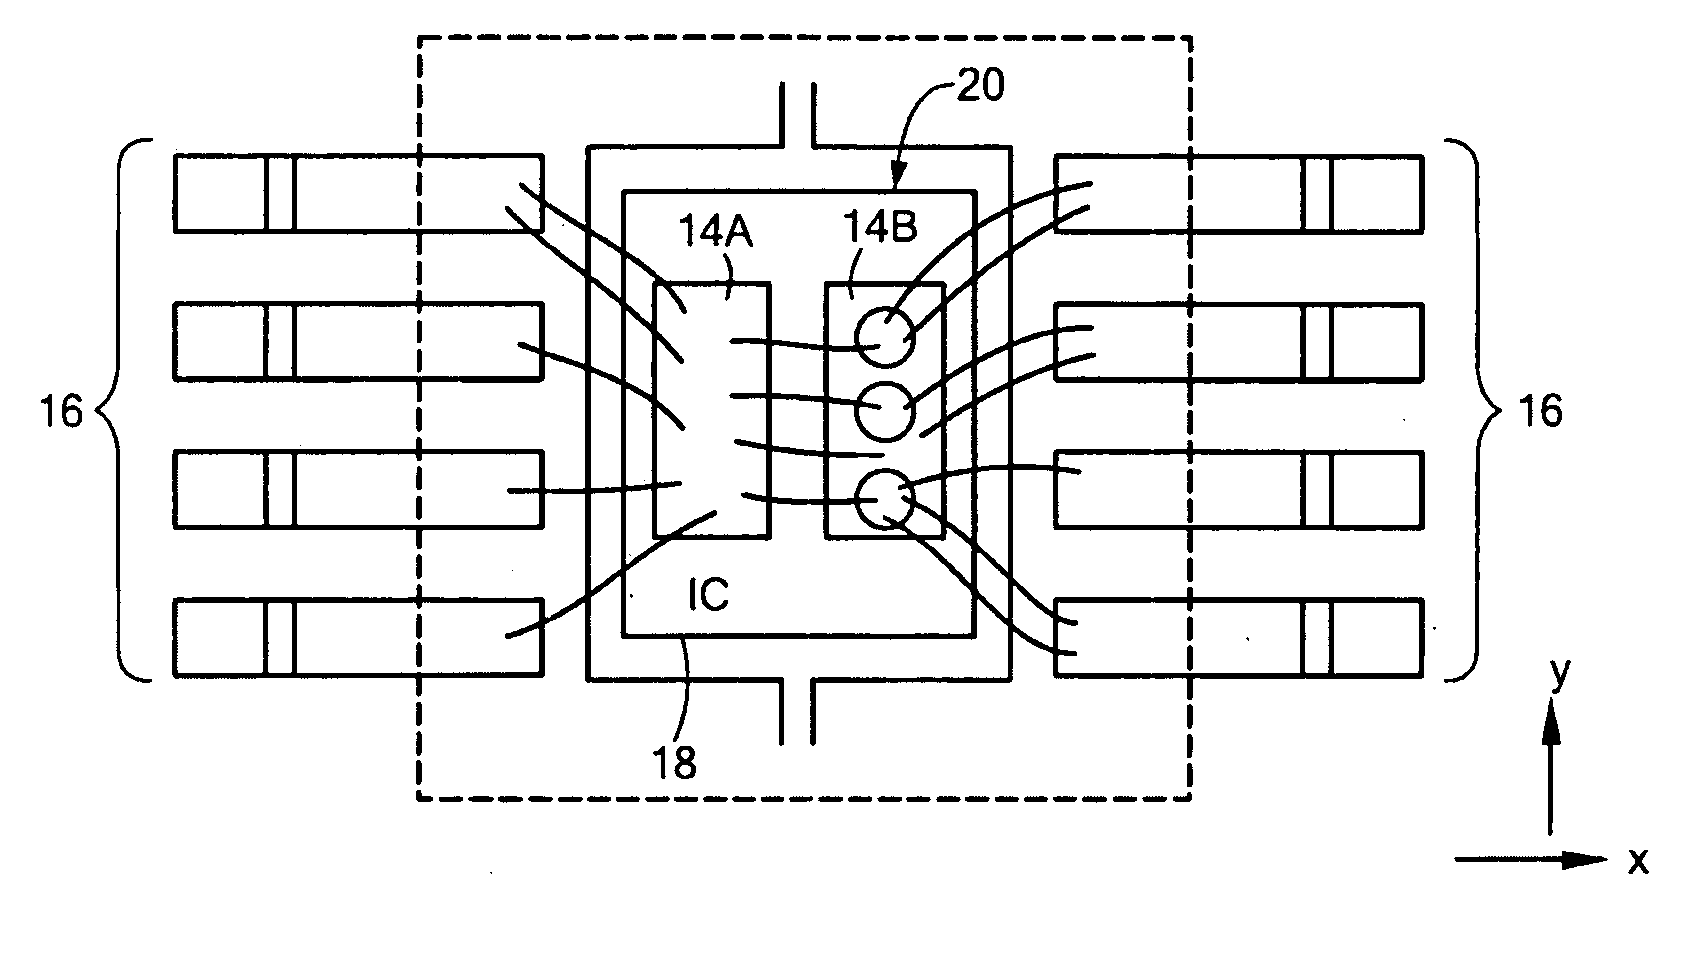 Packaged Microchip with Spacer for Mitigating Electrical Leakage Between Components